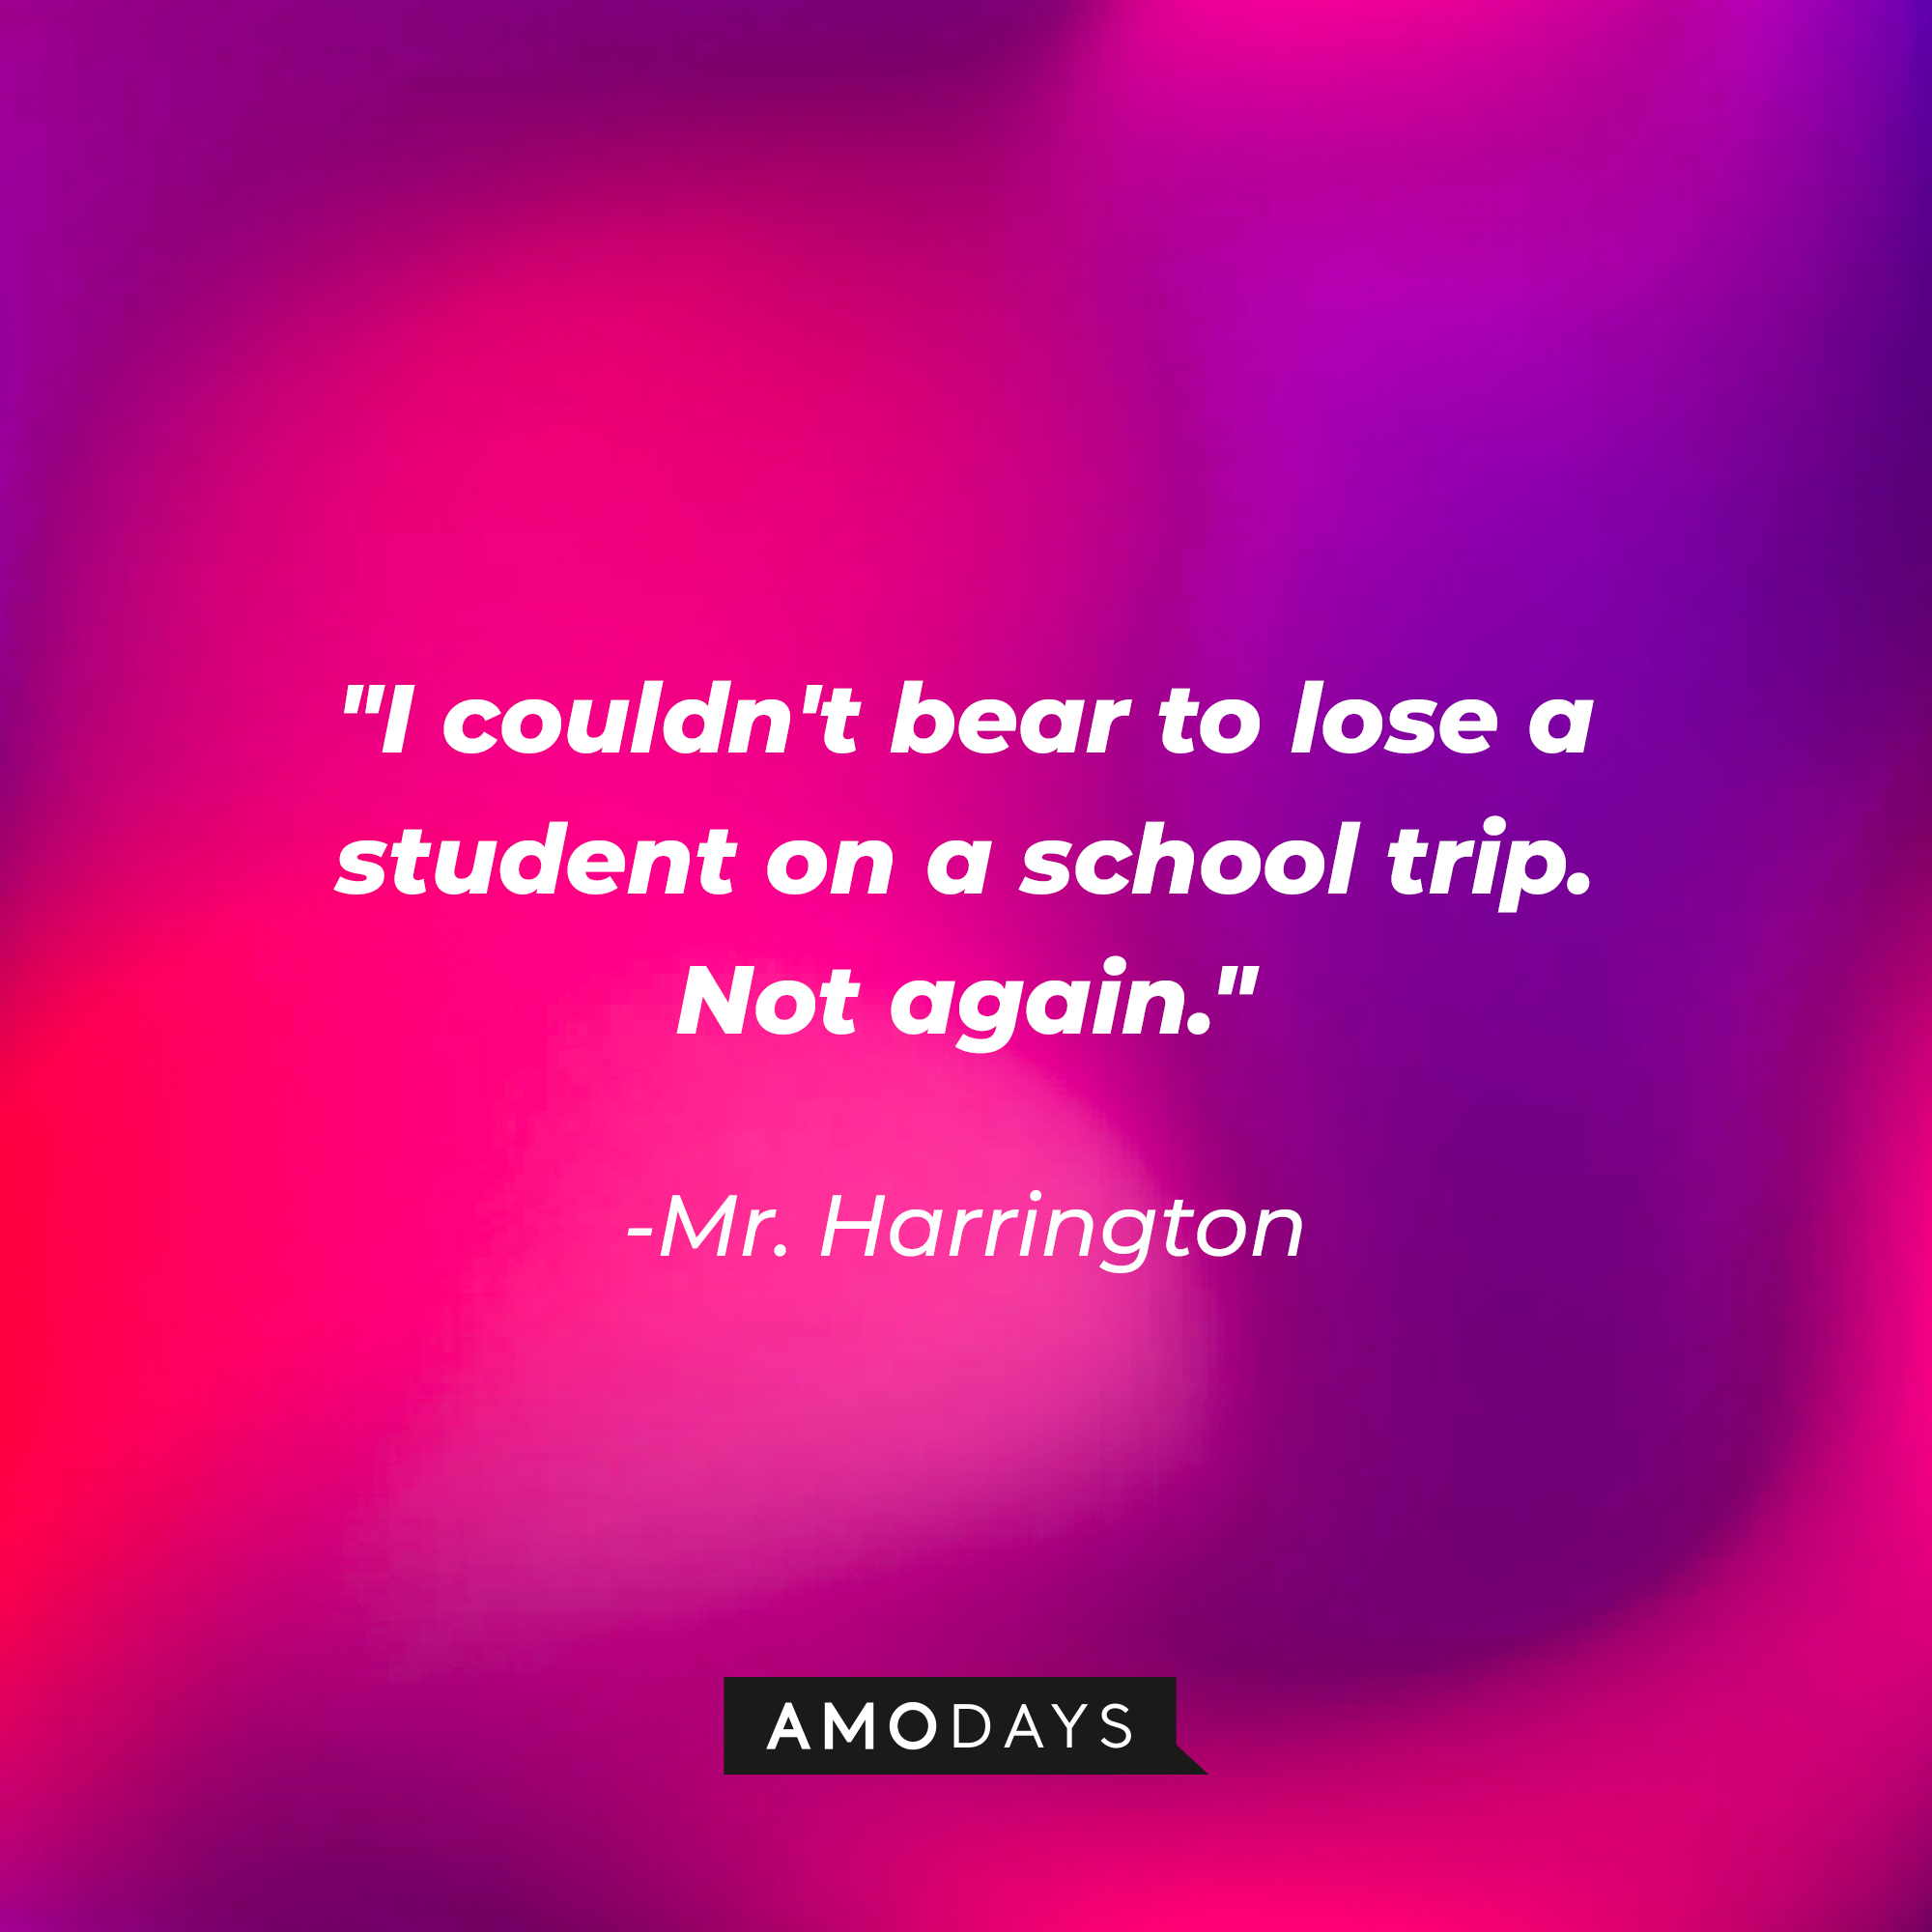 Mr. Harrington’s quote: "I couldn't bear to lose a student on a school trip. Not again." | Image AmoDays